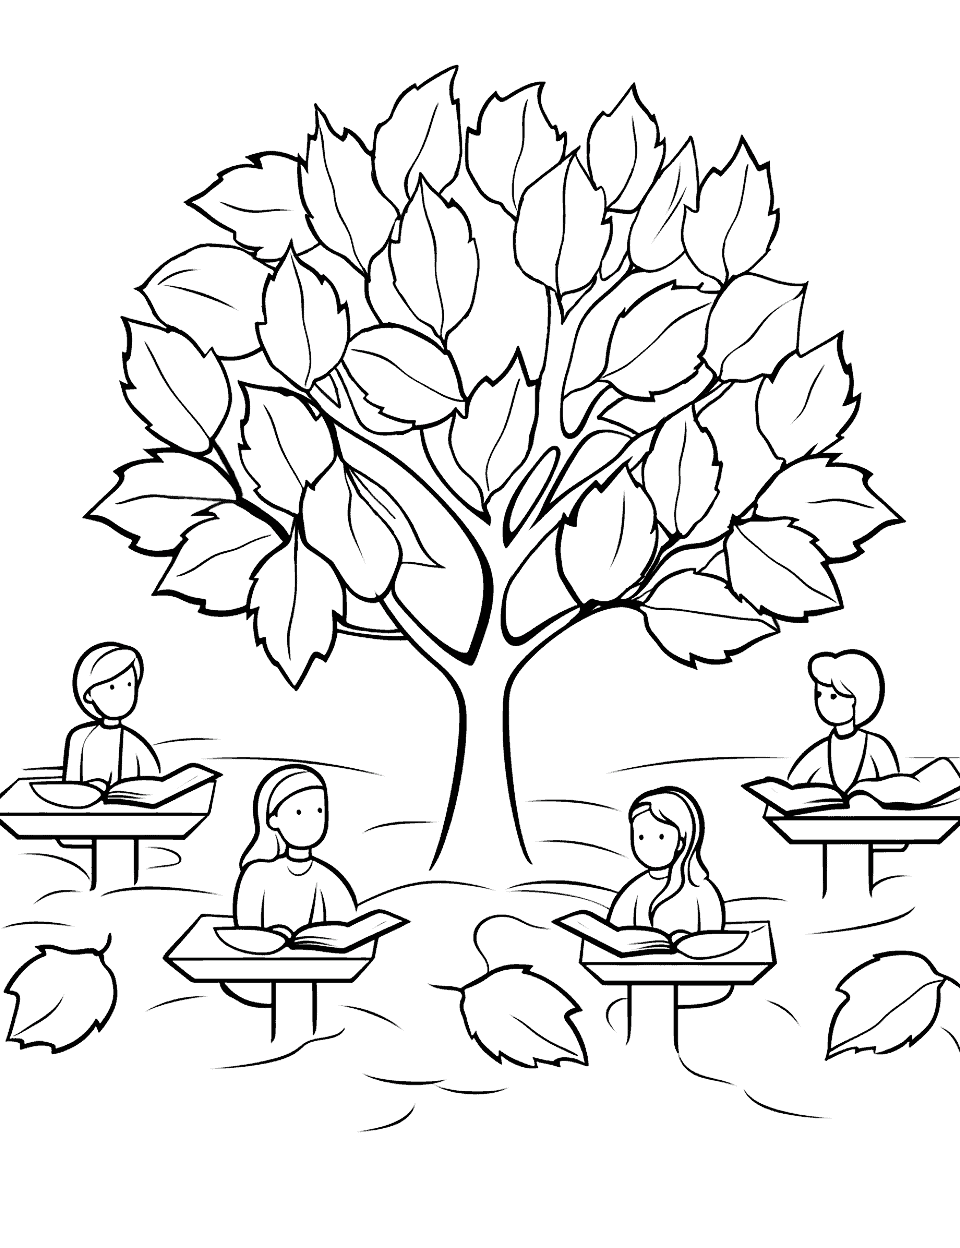 Sunday School Fall Lesson Coloring Page - A Sunday school class learning about the significance of the fall season.